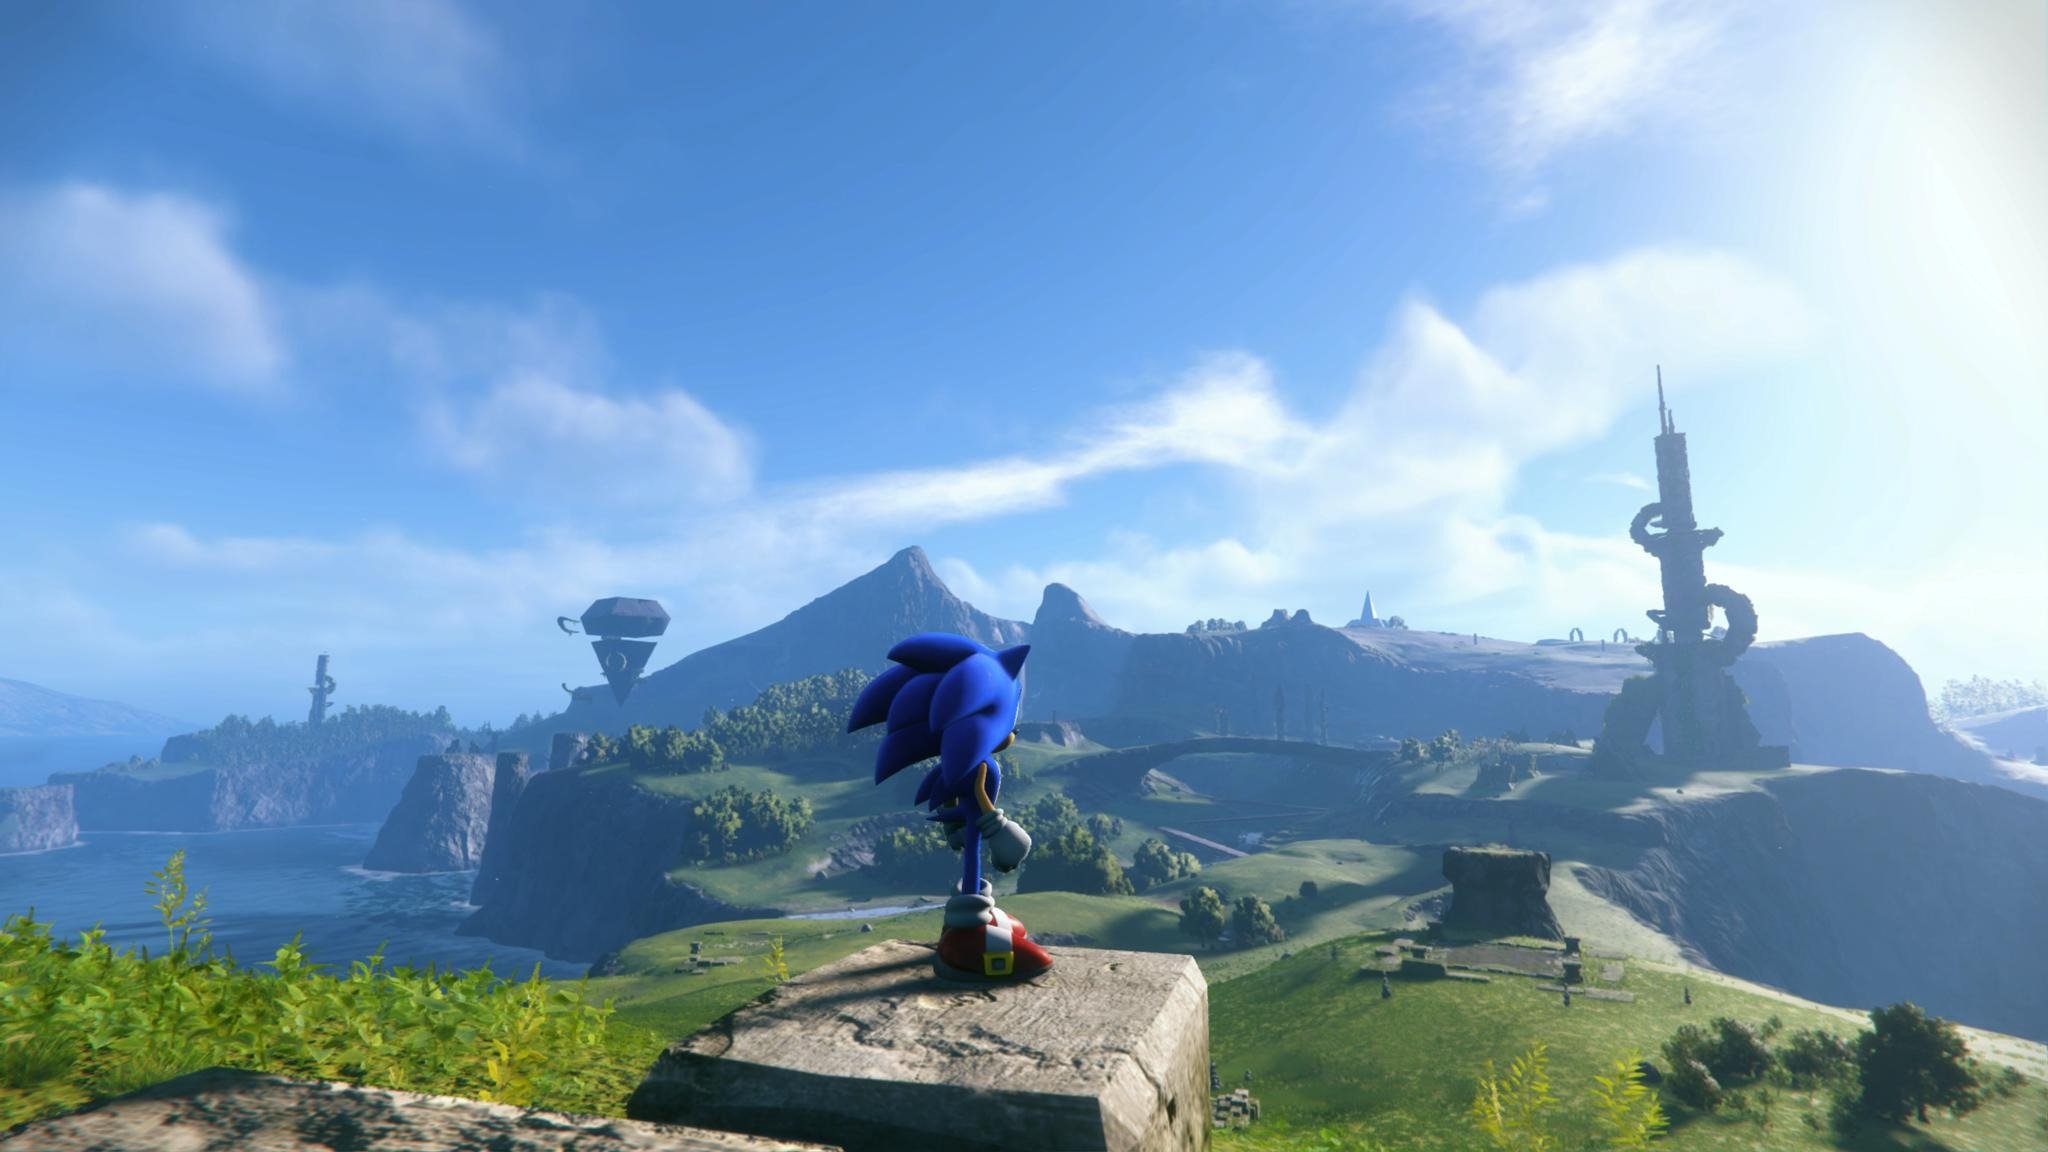 Sonic Frontiers gets seven minutes of open world gameplay - Niche Gamer